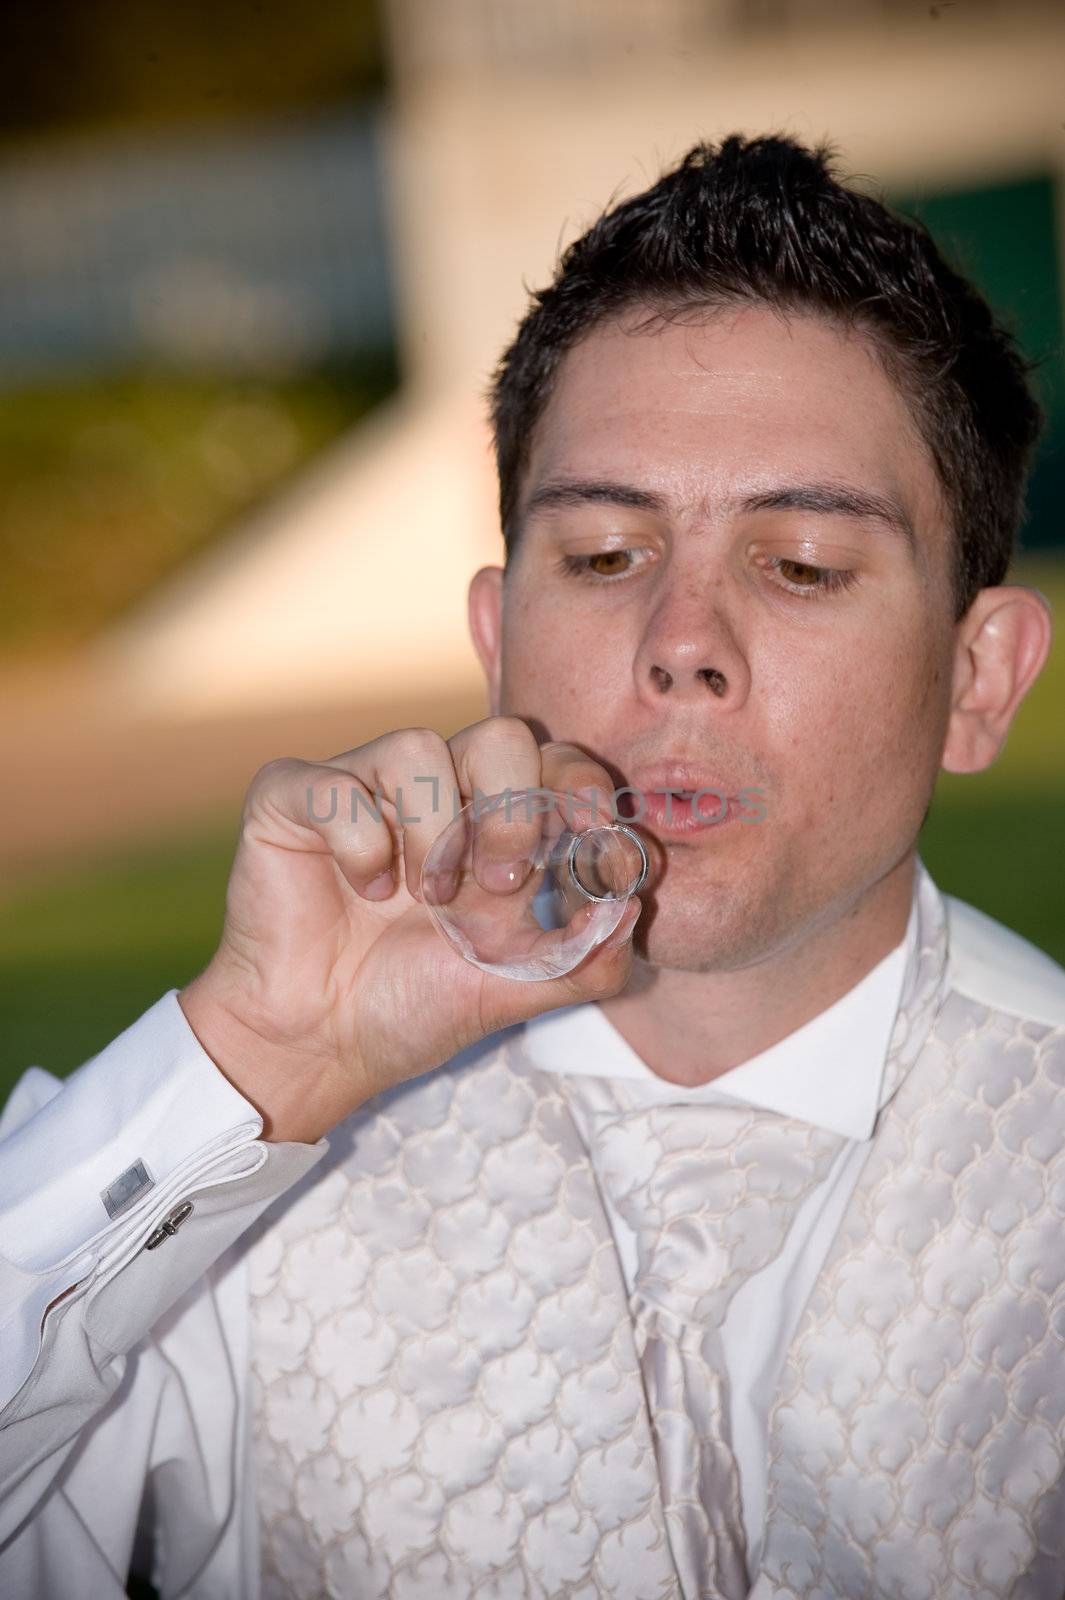 well dressed groom blowing bubbles through a wedding ring by Ansunette